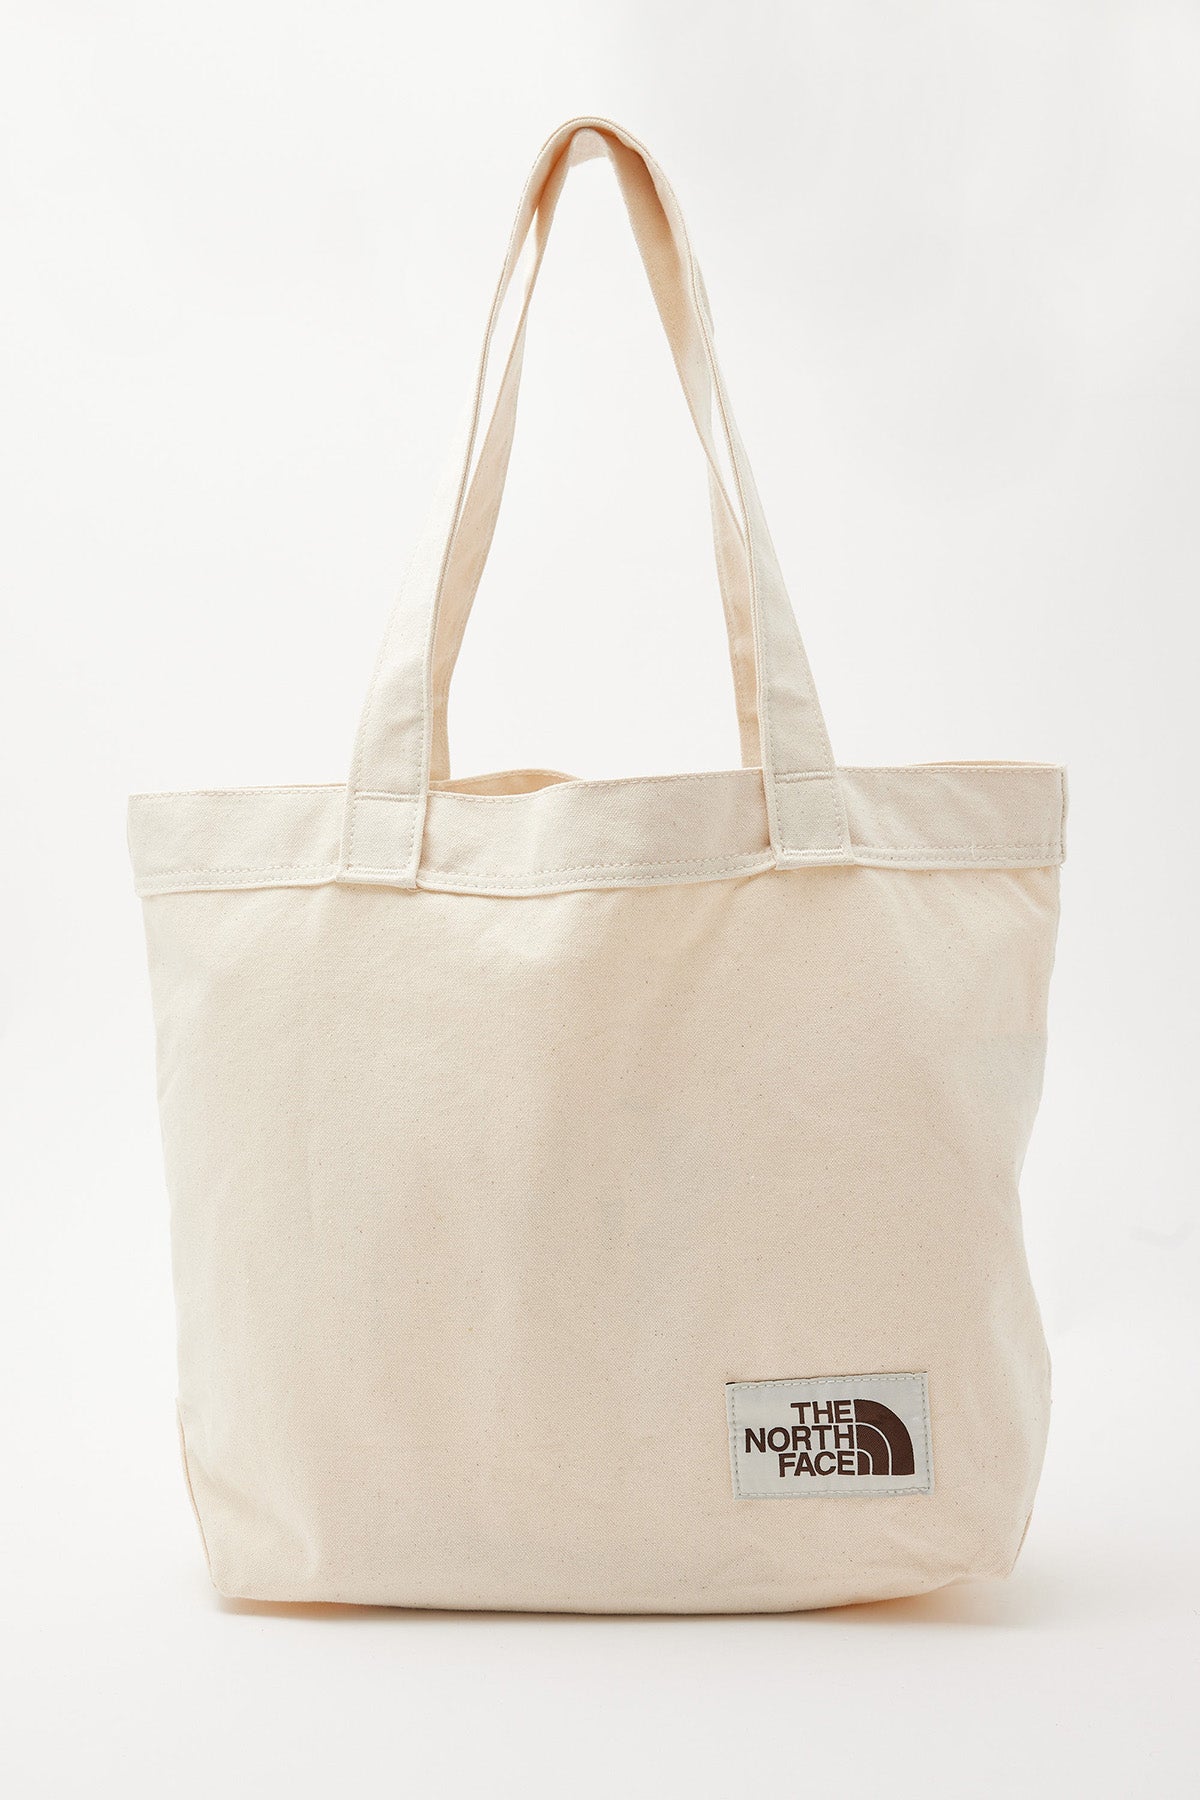 The North Face Weimaraner Tote Bag Brown Large Logo Print